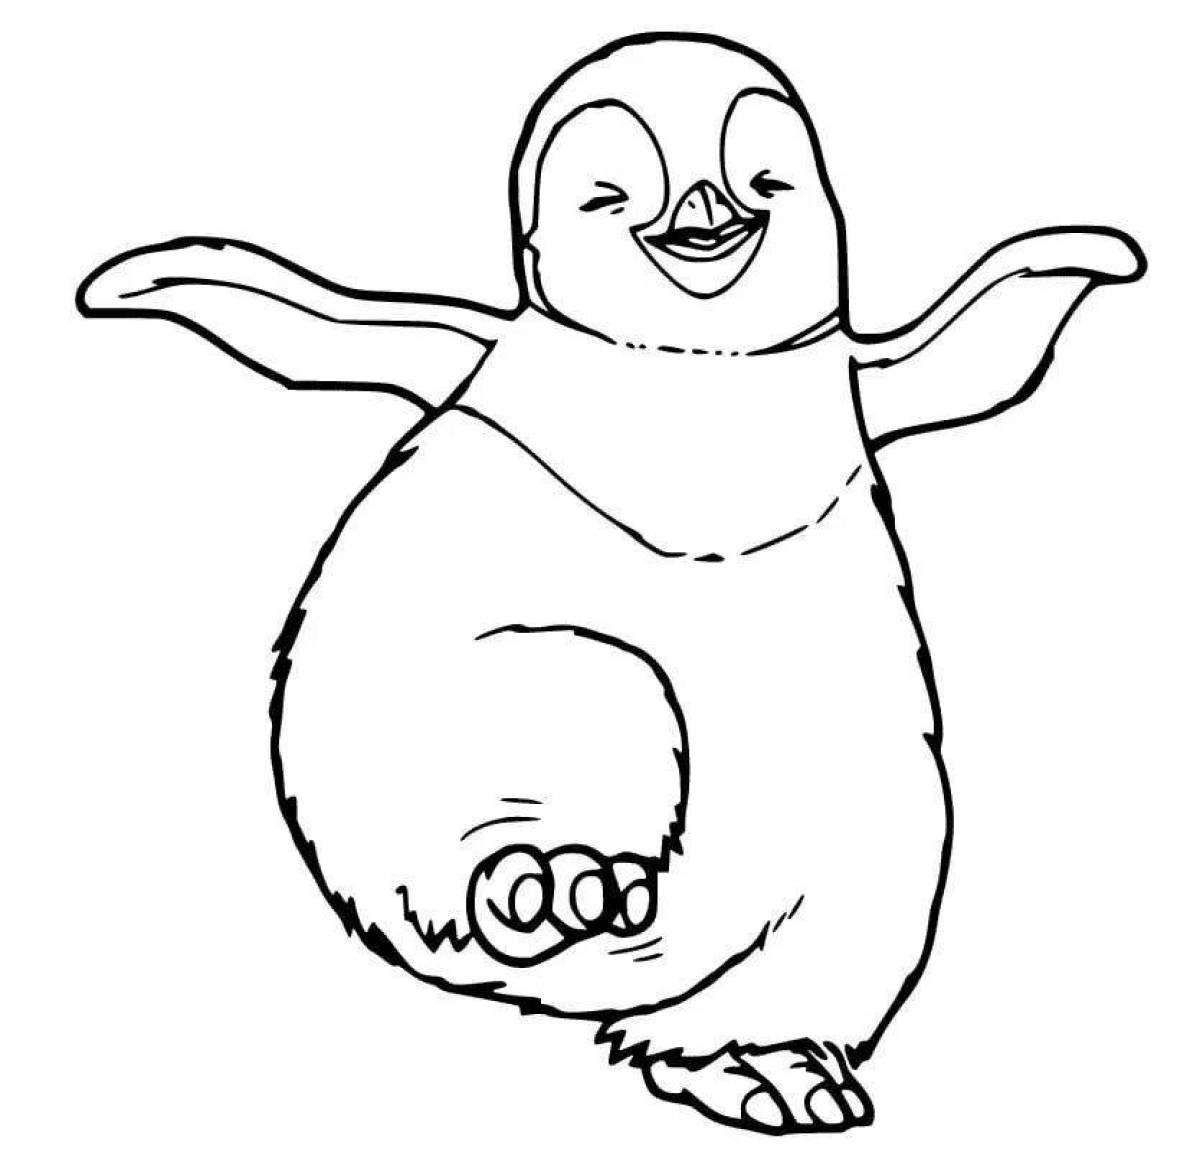 Delightful coloring pages animals of the north pole